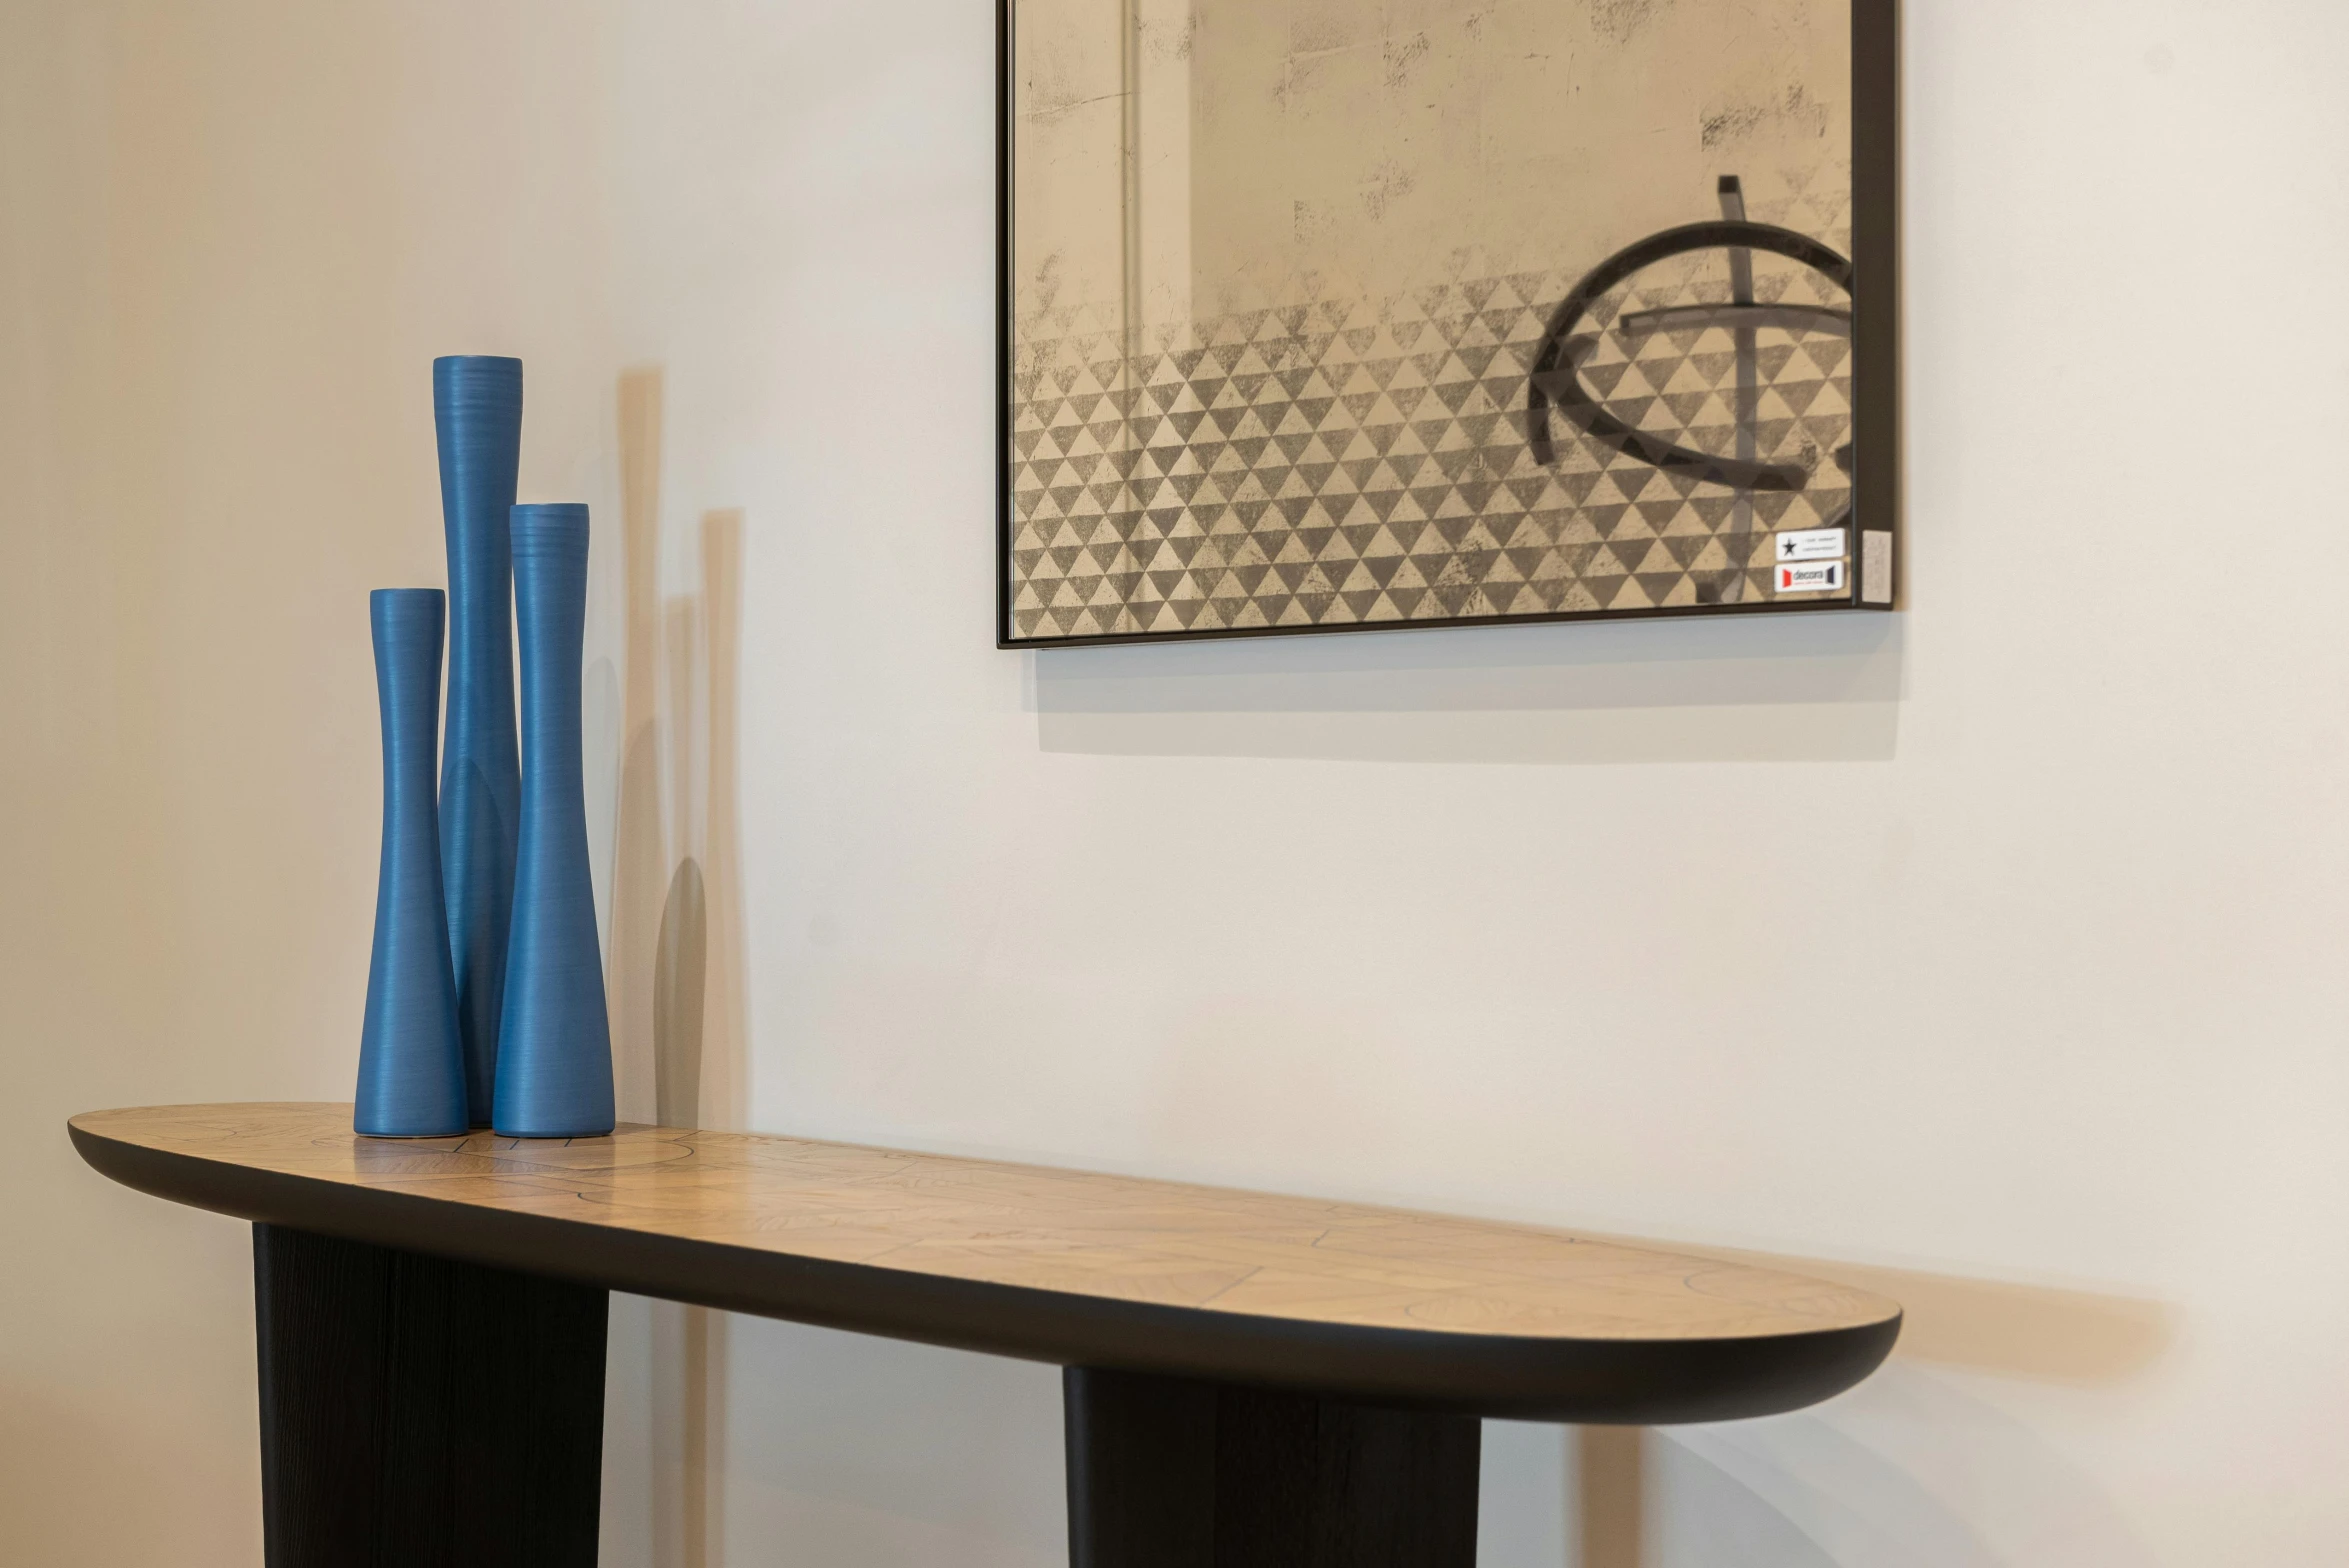 a wooden table with two blue vases on it, an abstract sculpture, visual art, gallery display photograph, ad image, sleek curves, o'neill cylinder